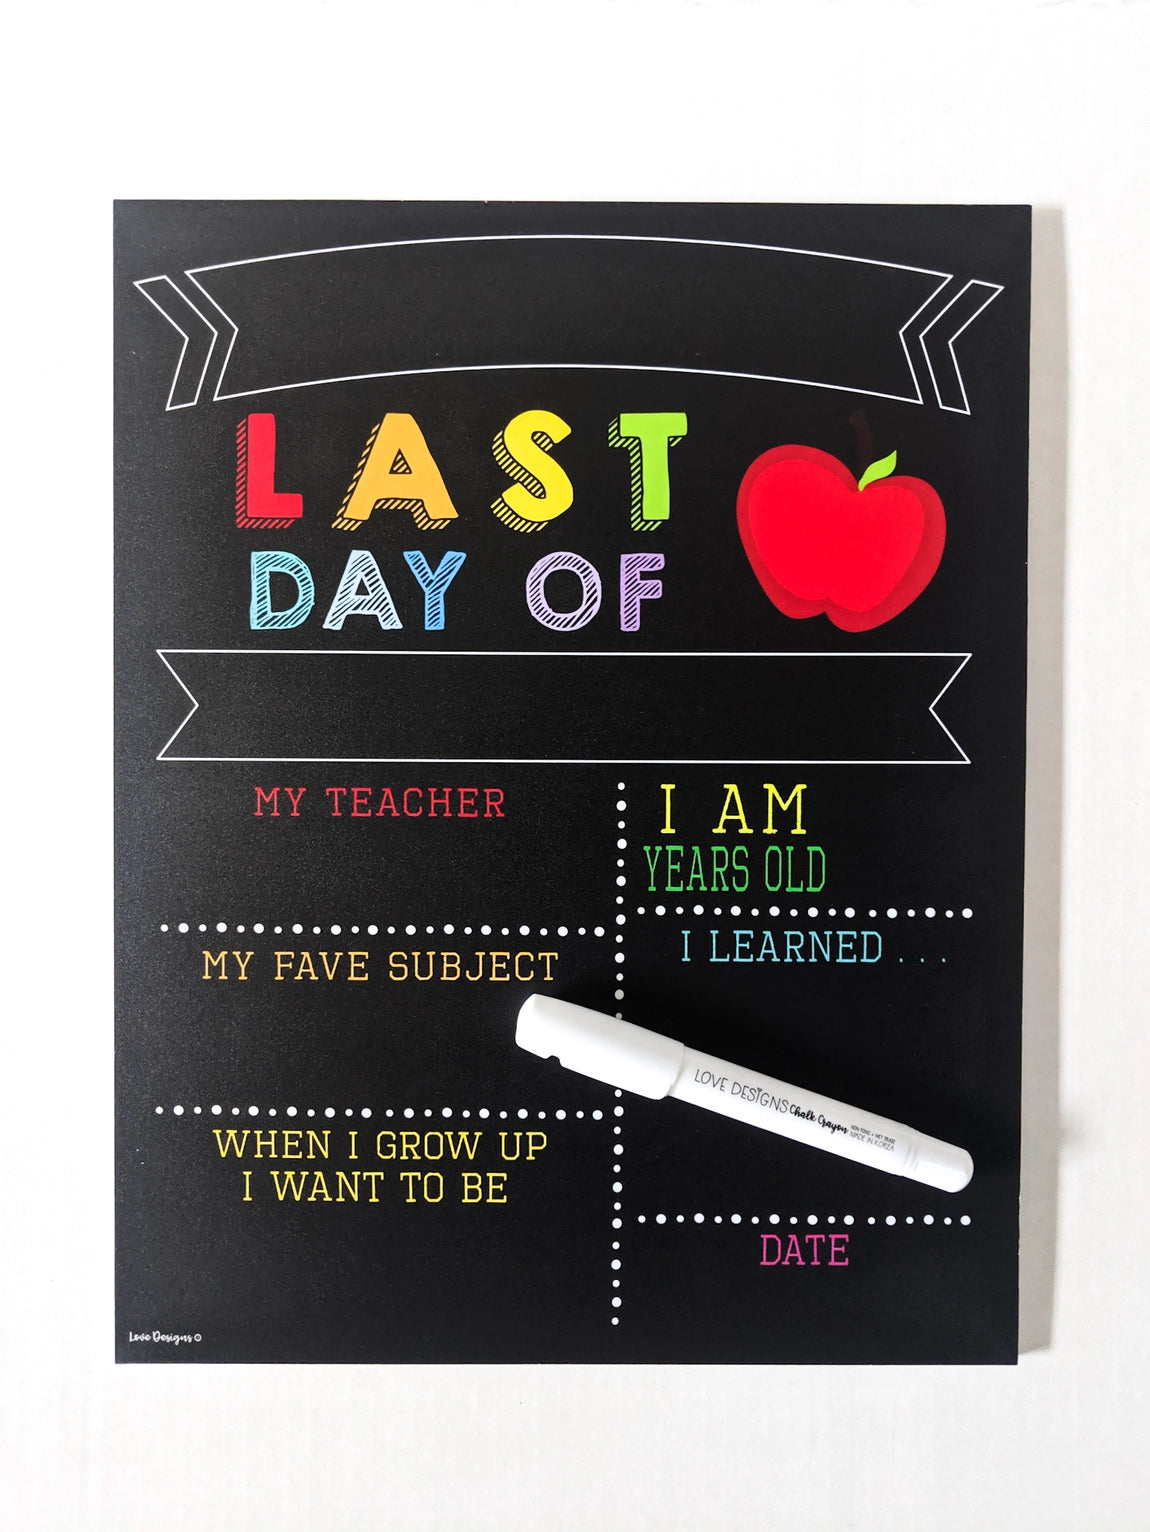 Love designs first and last day of school chalkboard sign, the local space, local canadian brands